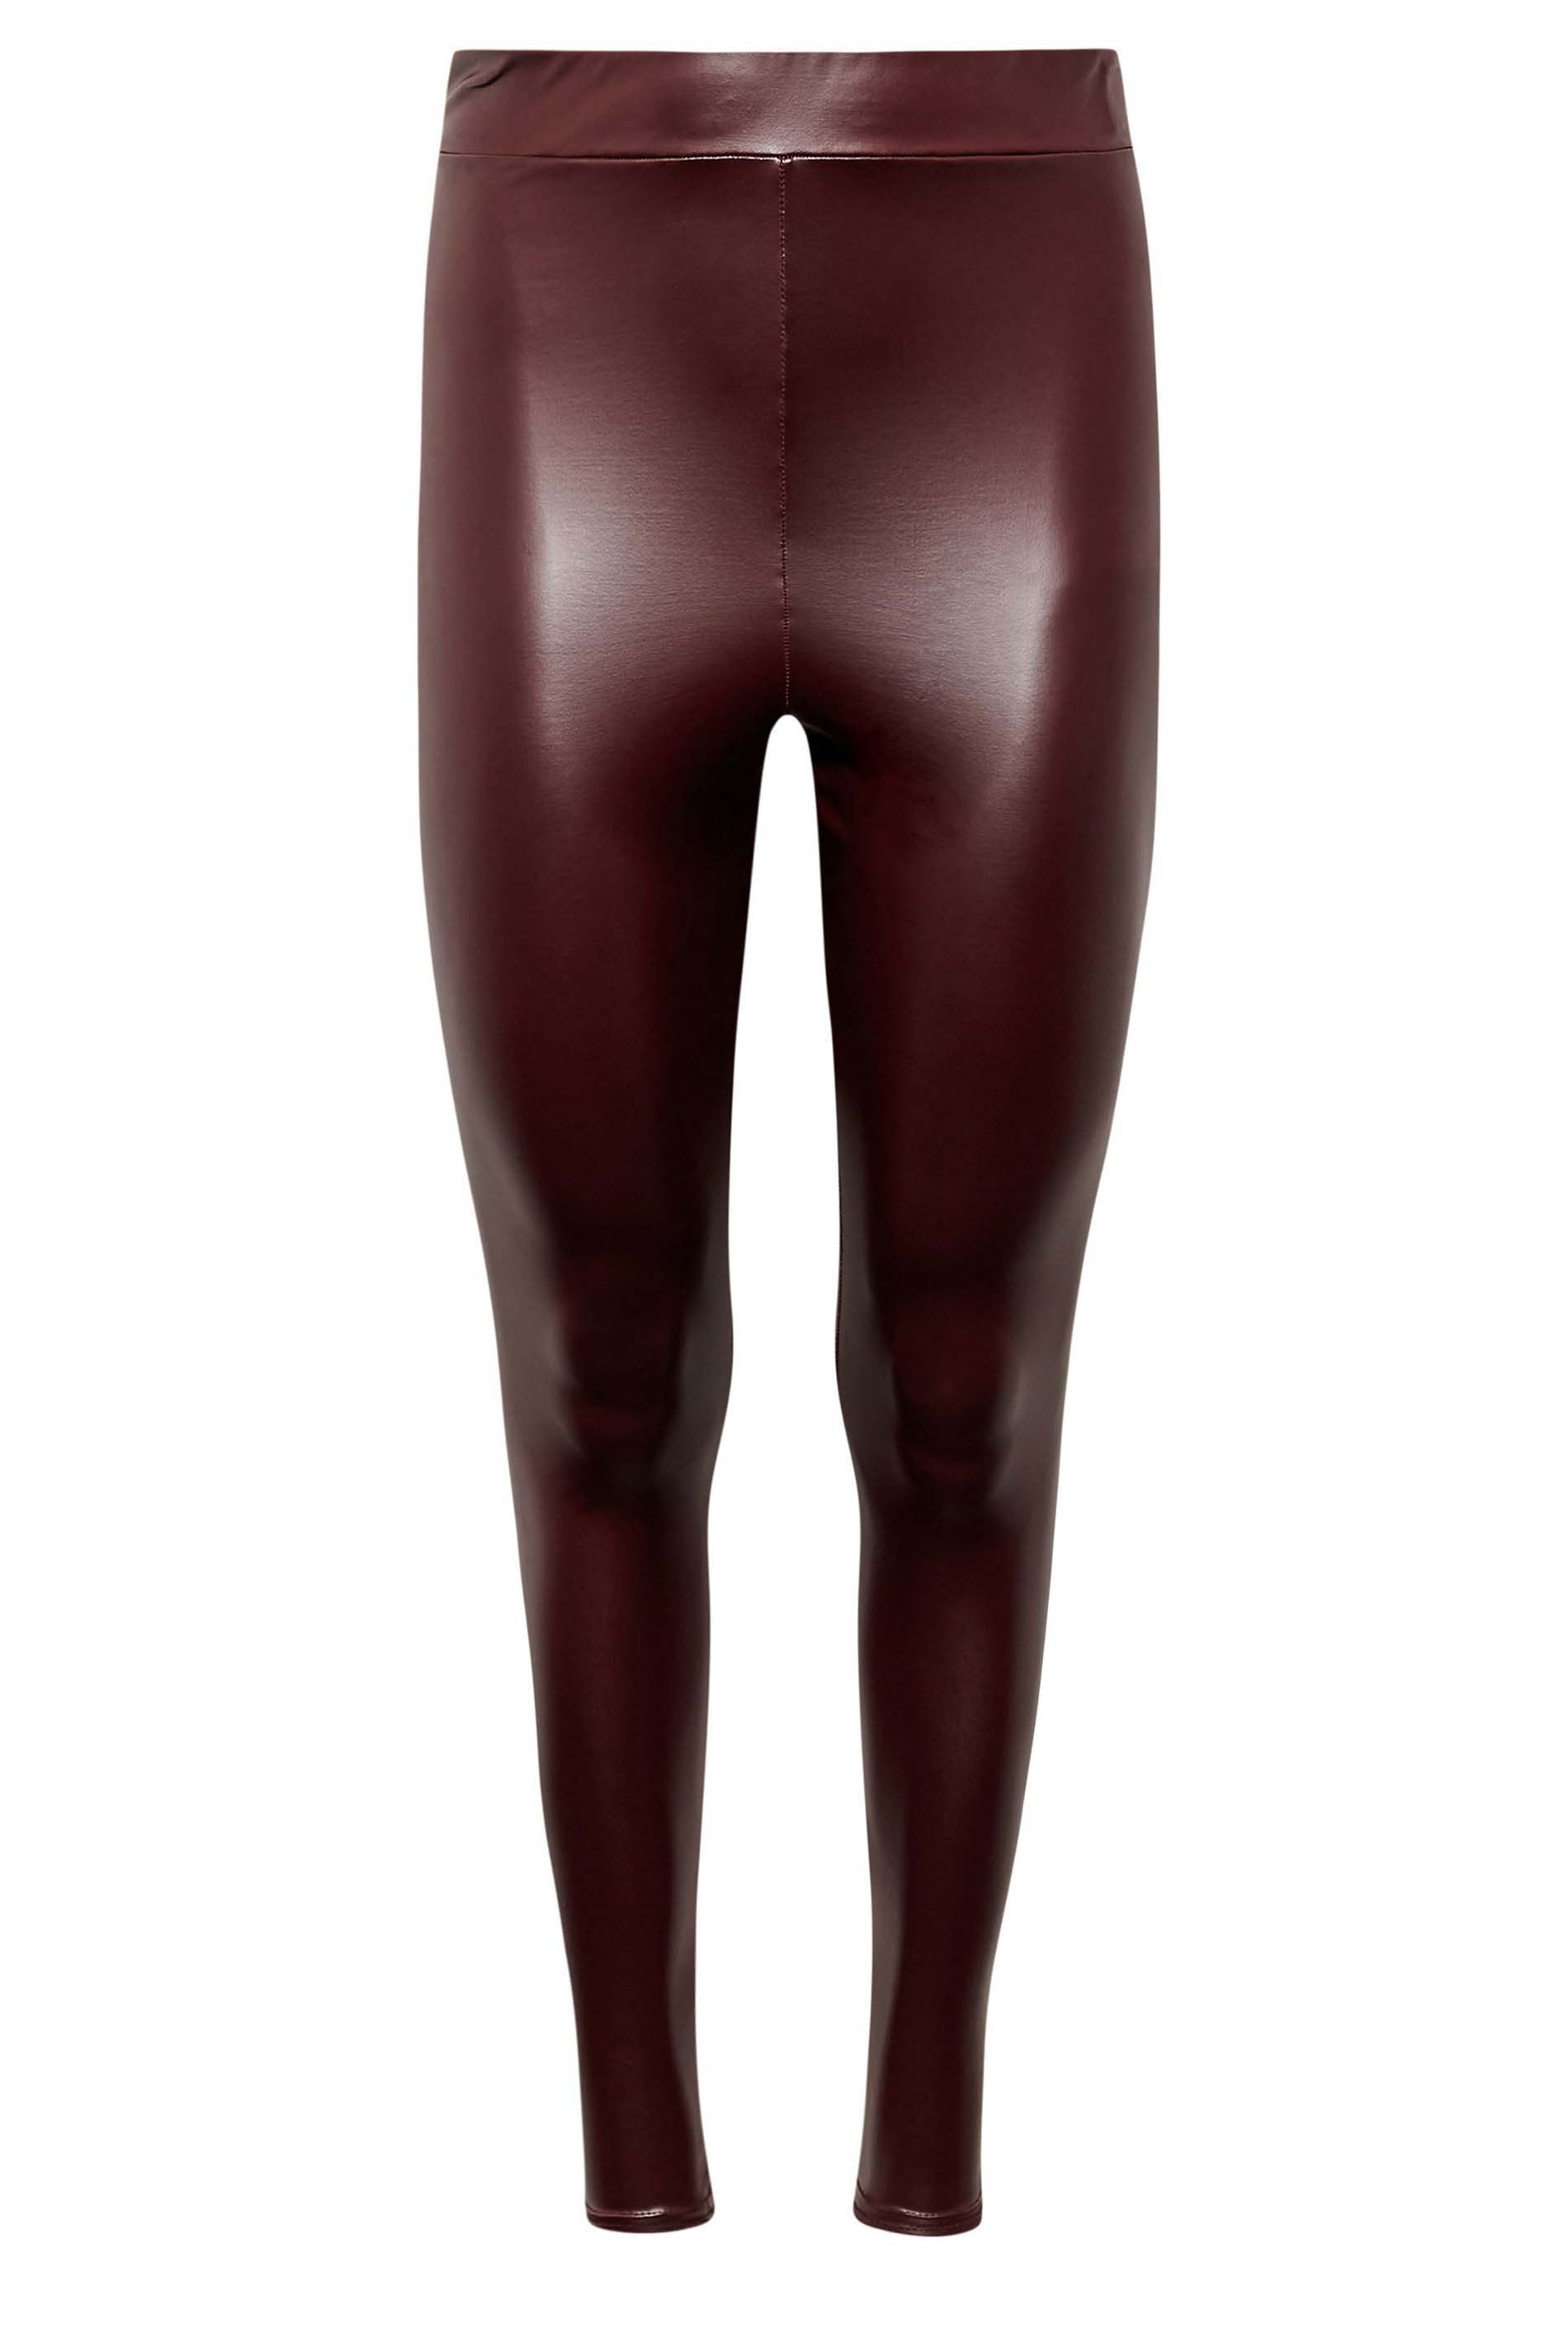 Petite Womens Burgundy Red Stretch Leather Leggings